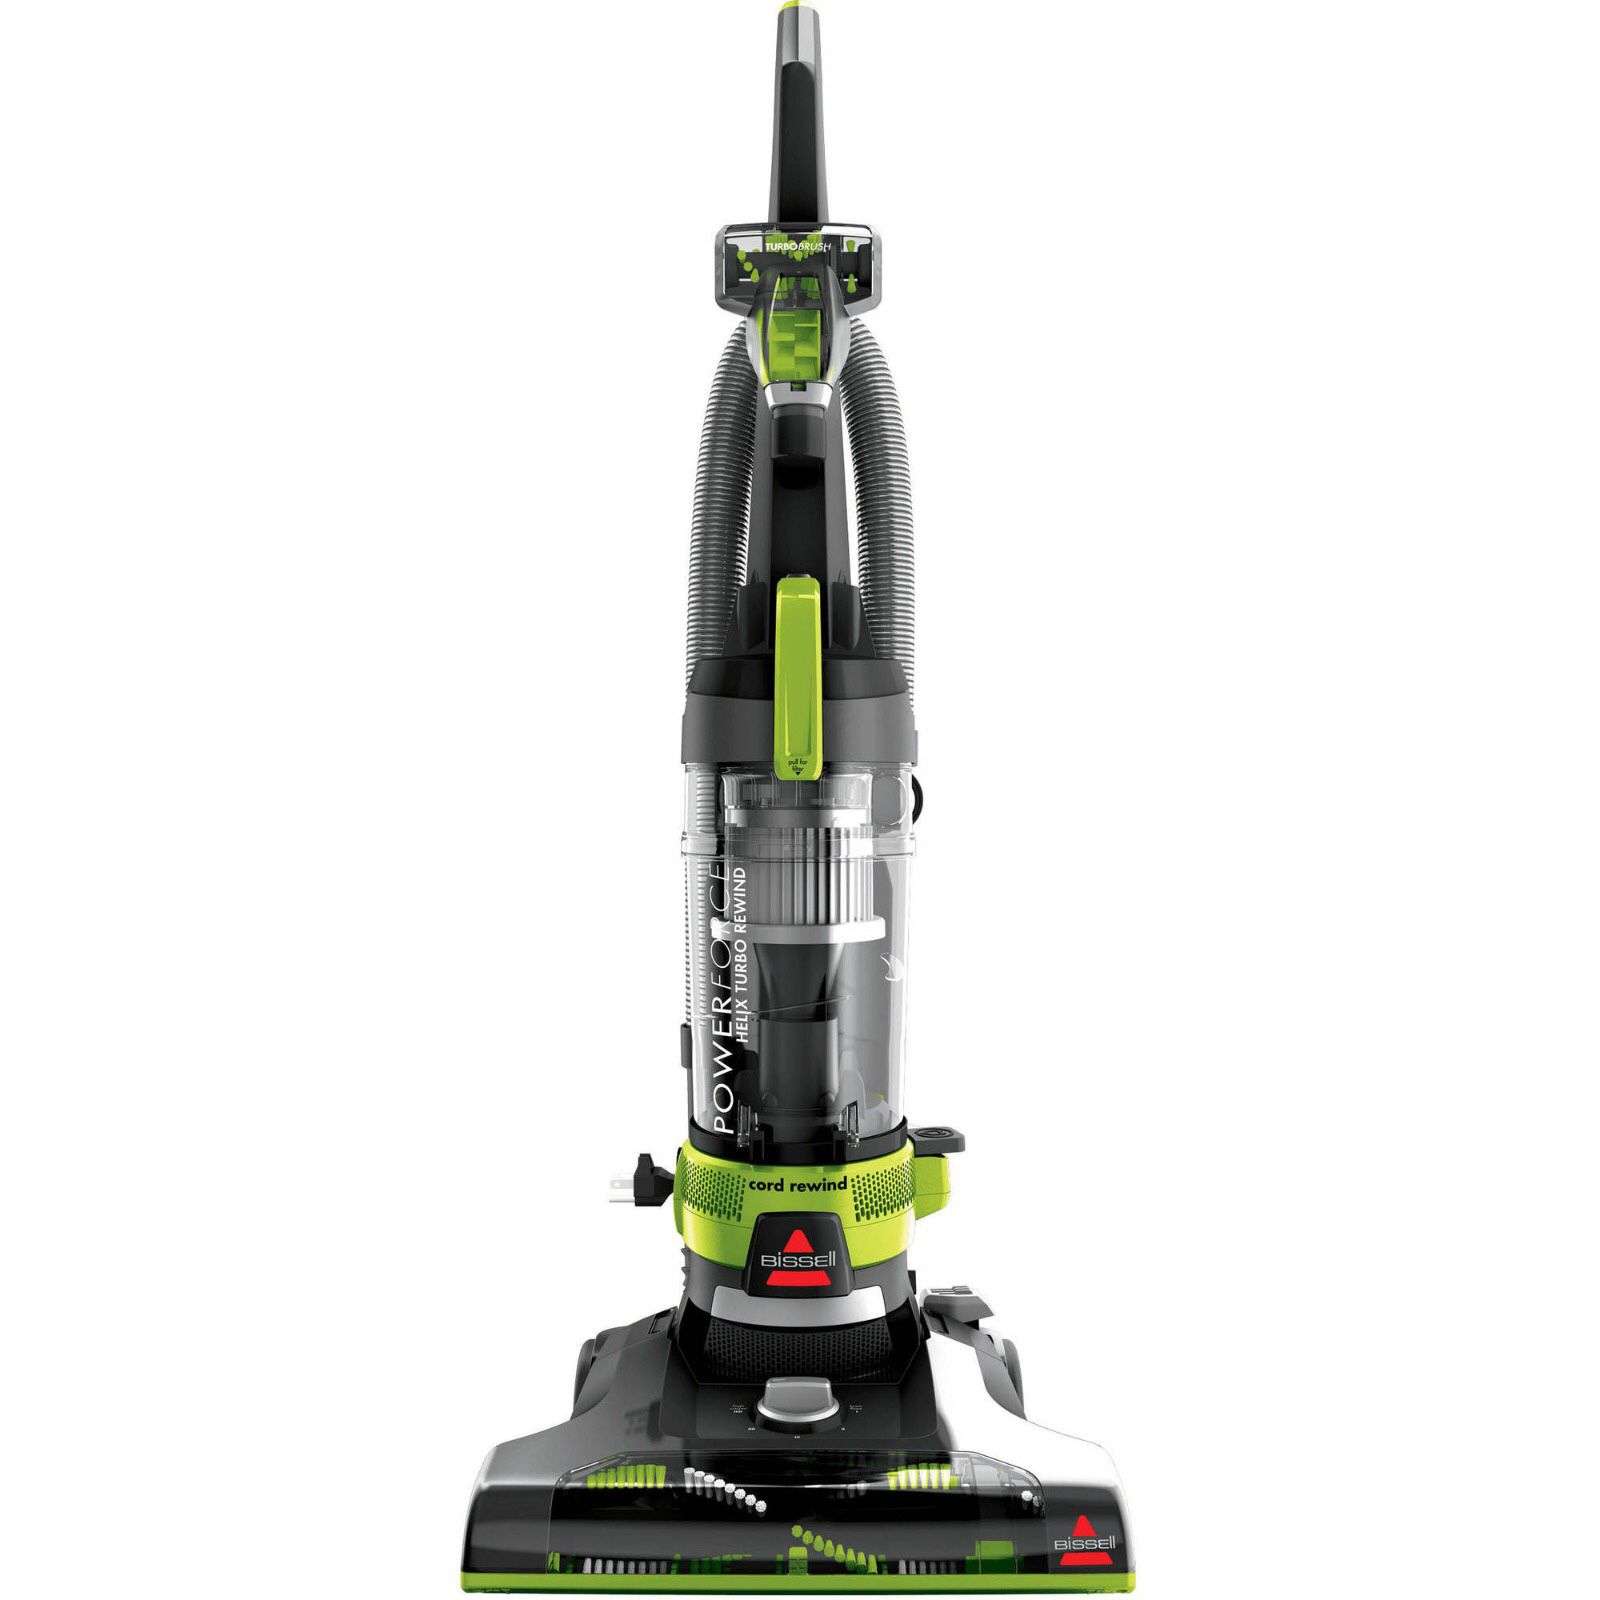 BRAND NEW - Bussell Bagless Vacuum